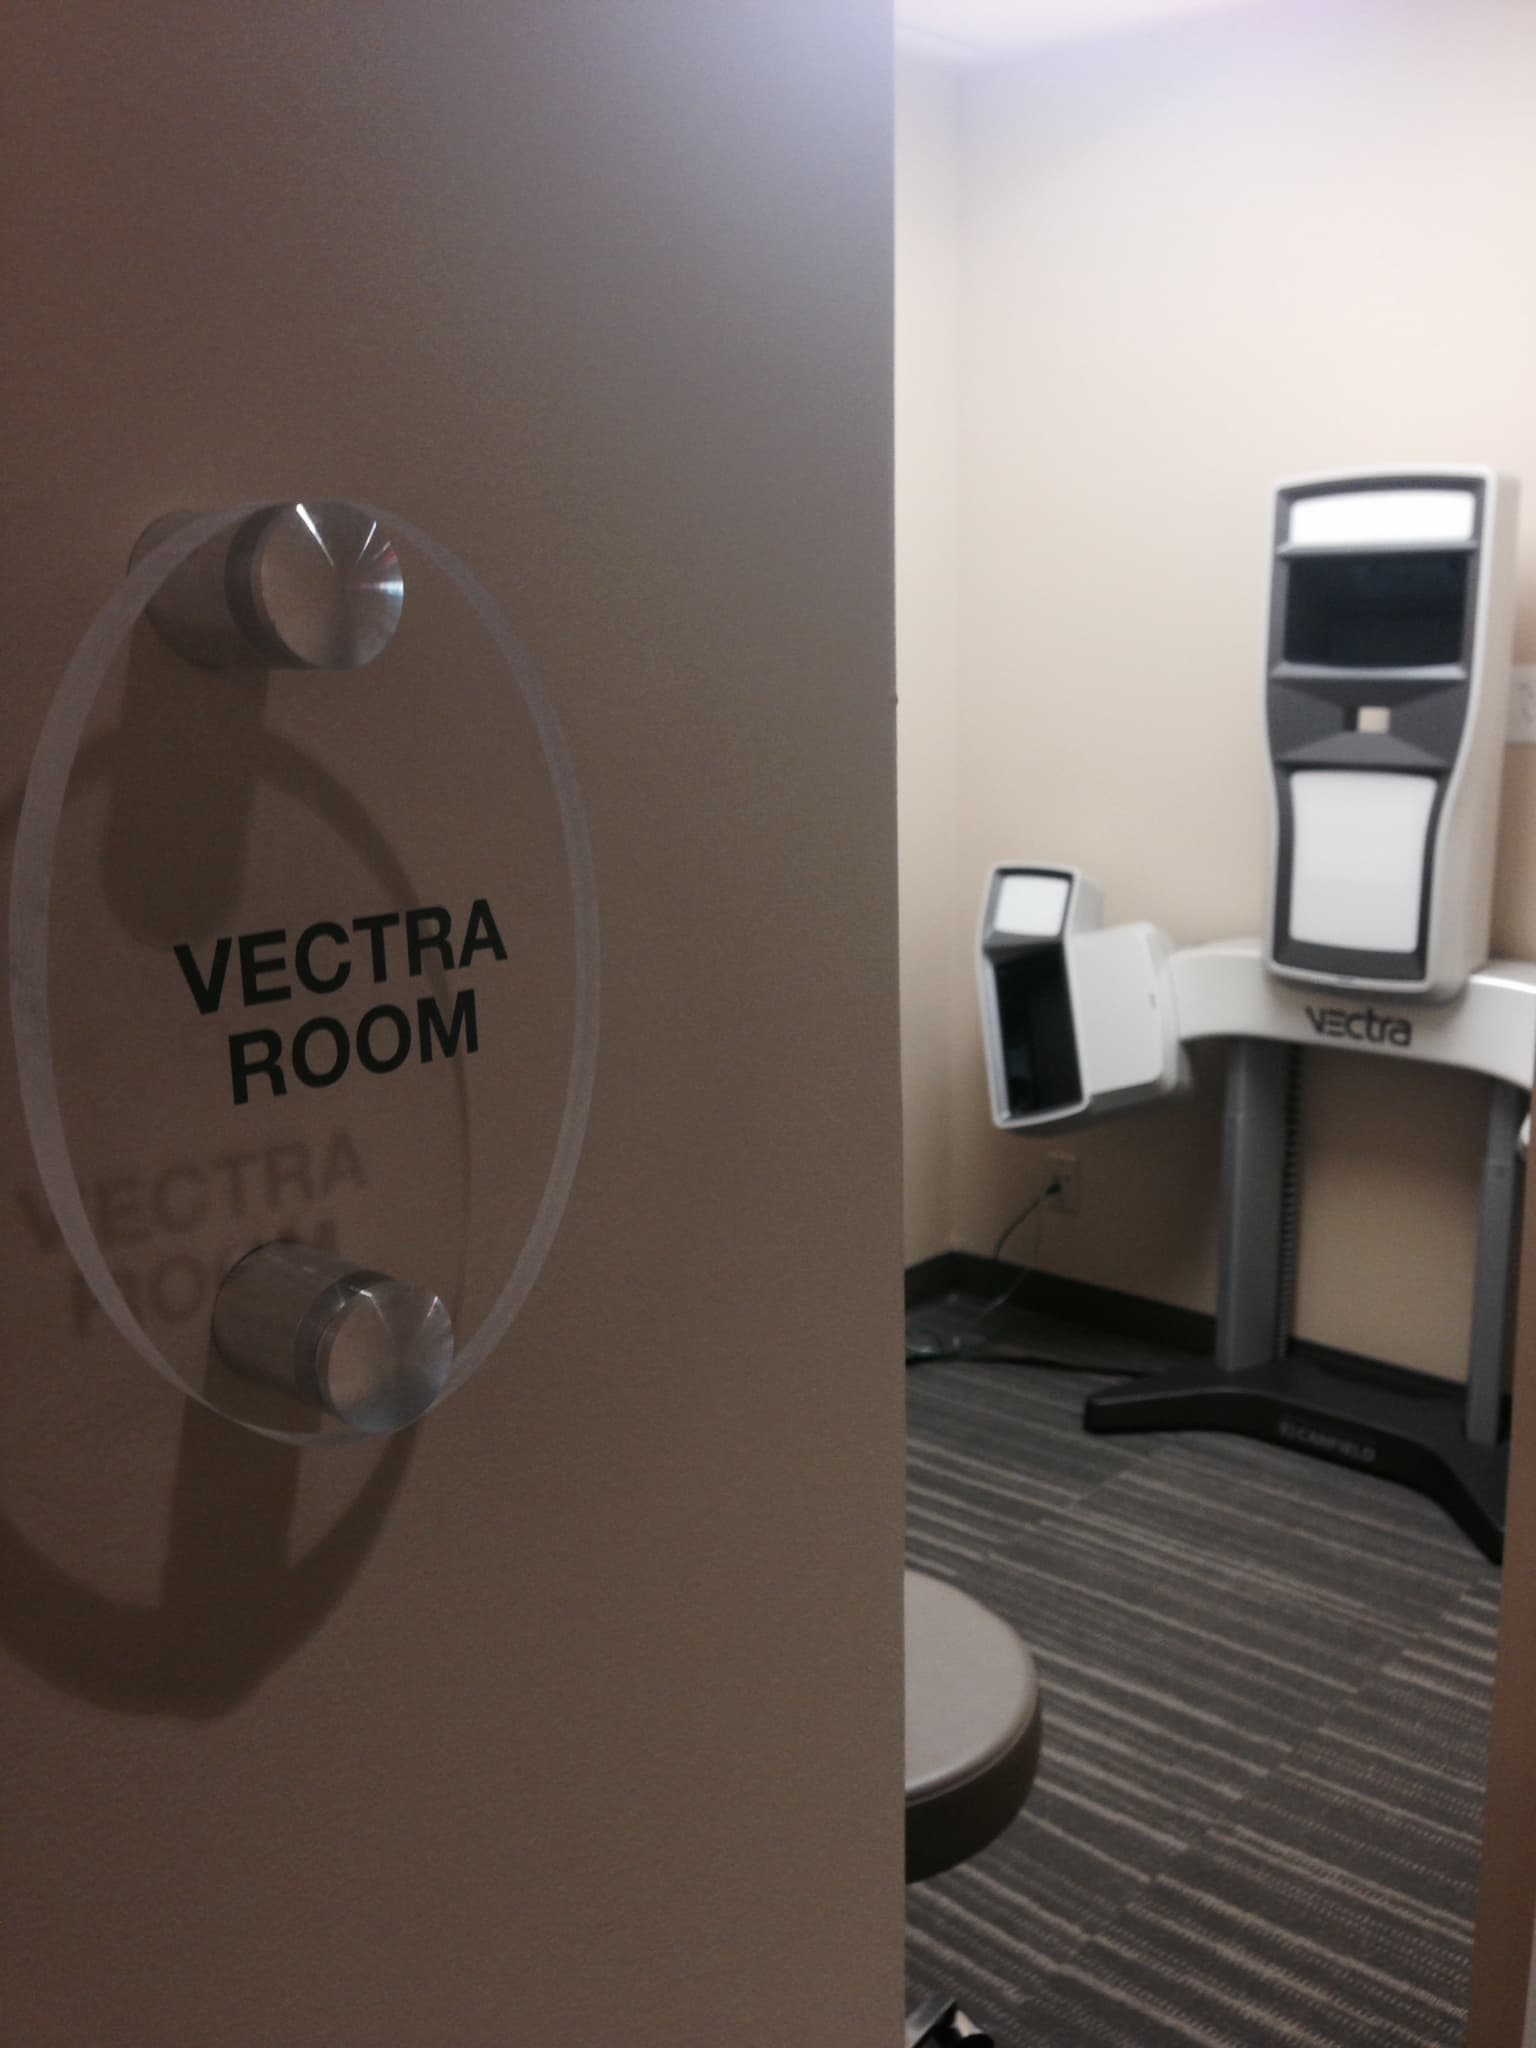 The Vectra Room at the Garden City location.